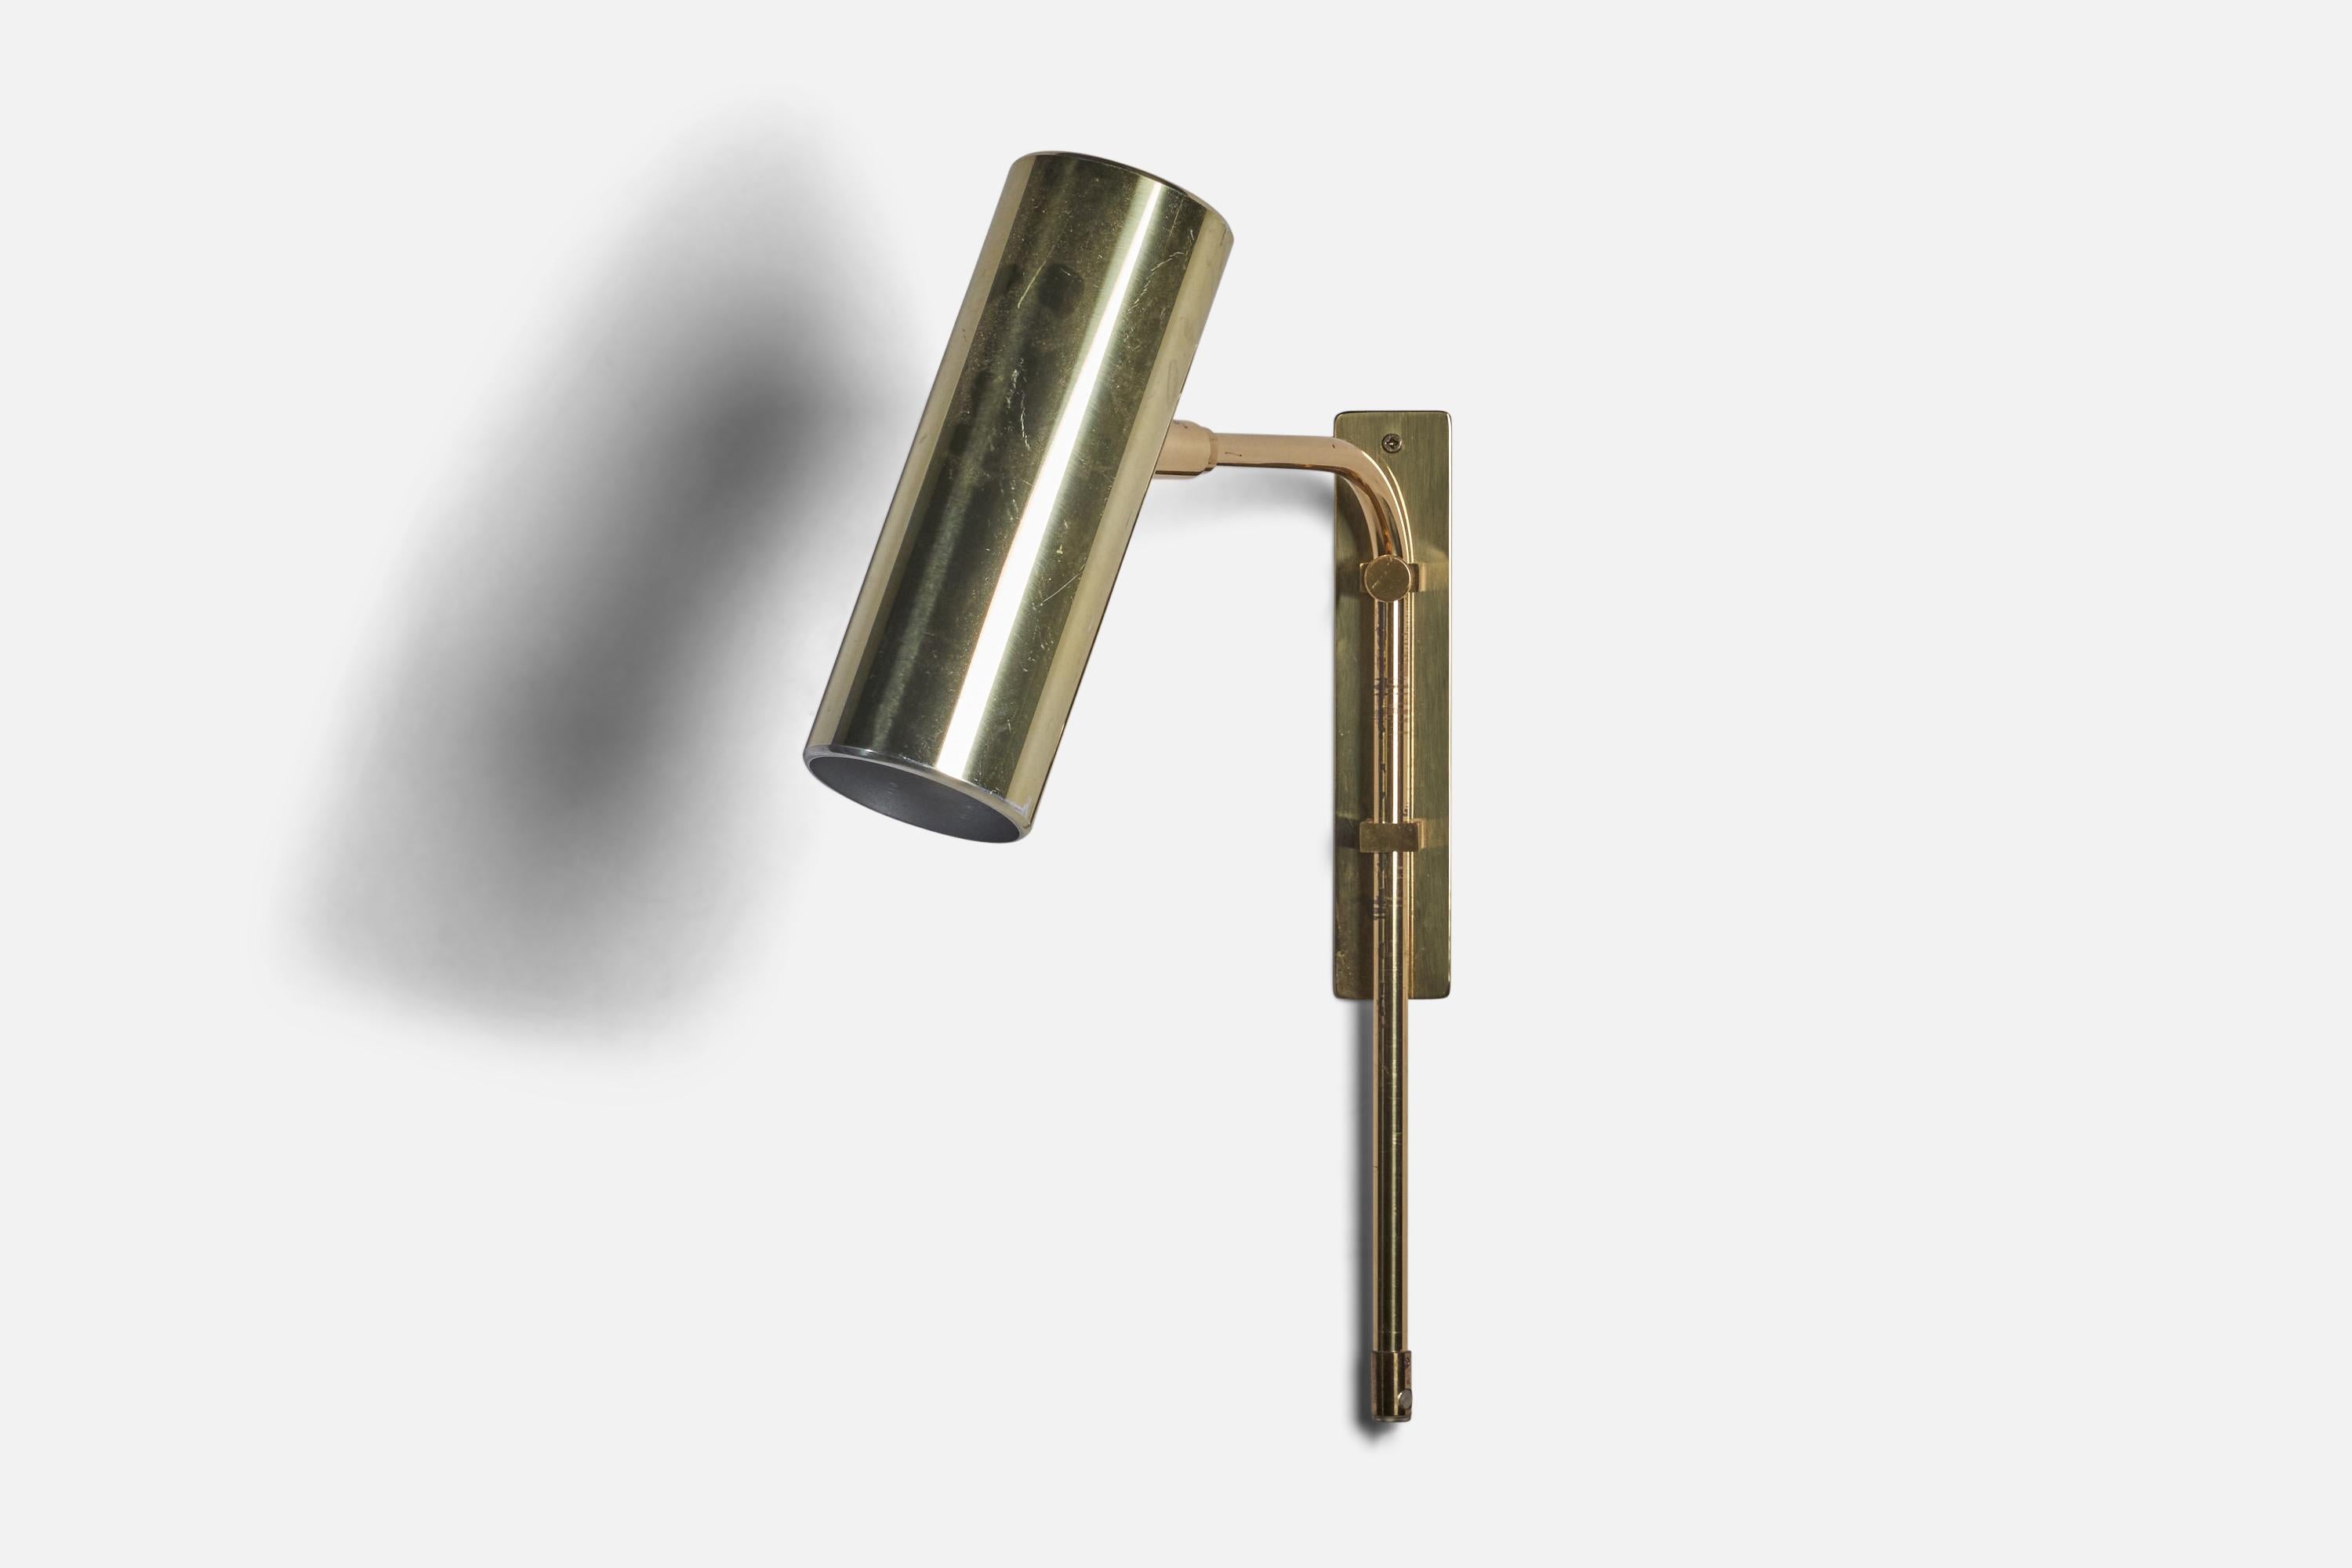 
An adjustable brass wall light designed and produced by Bergboms, Sweden, c. 1970s.
Overall Dimensions (inches): 17” H x 2.9” W x 12.5” D
Back Plate Dimensions (inches): 7.75” H x 1.5” W
Bulb Specifications: E-14 Bulb
Number of Sockets: 1
All